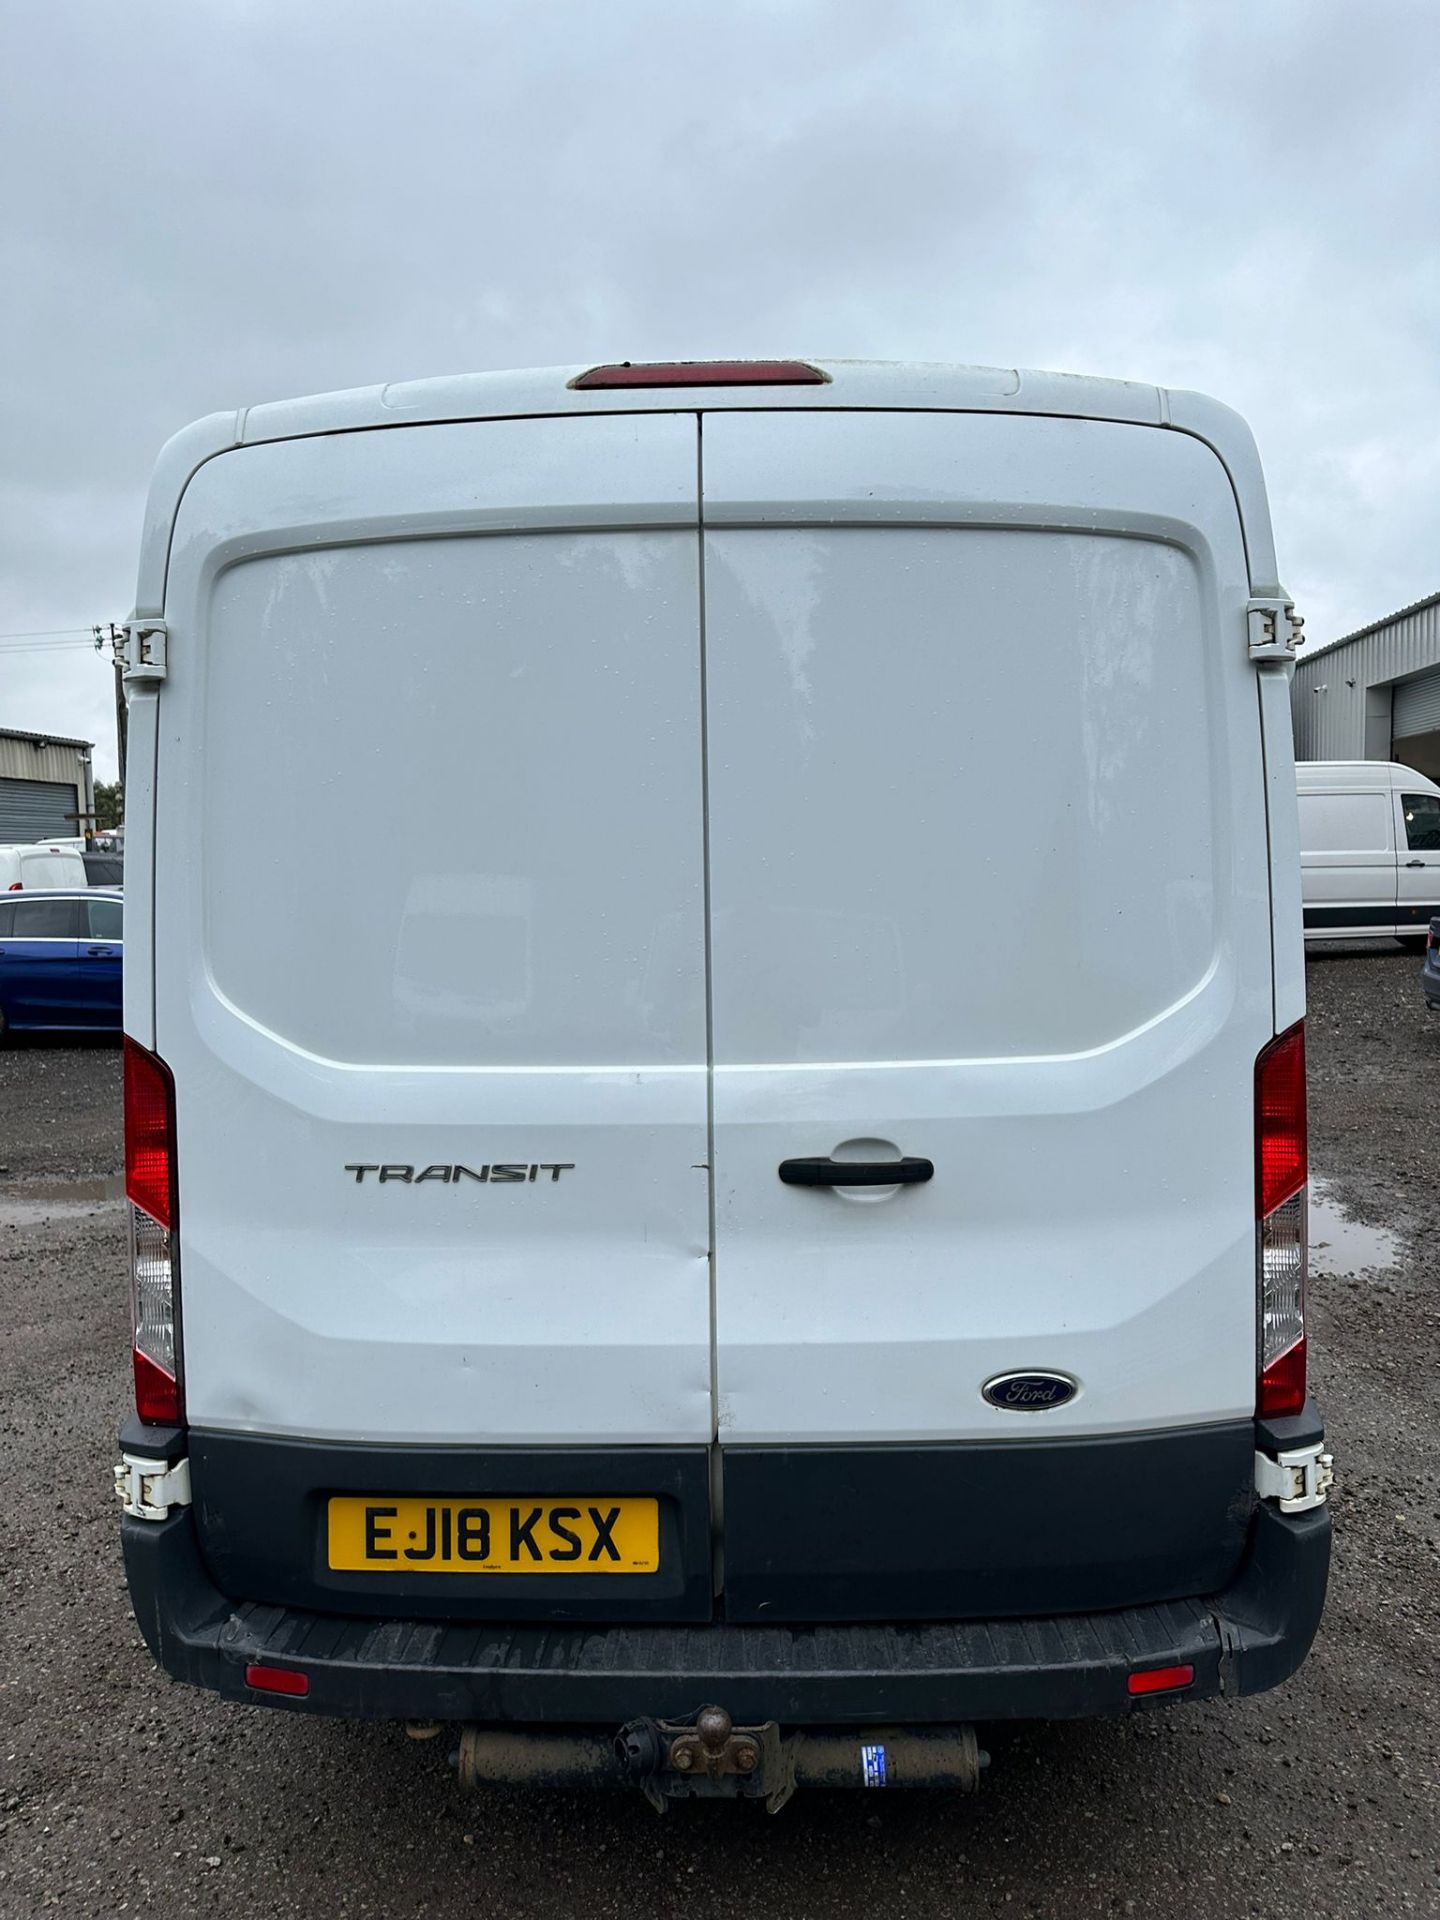 2018 18 FORD TRANSIT L2H2 PANEL VAN - 96K MILES - PLY LINED - Image 5 of 7